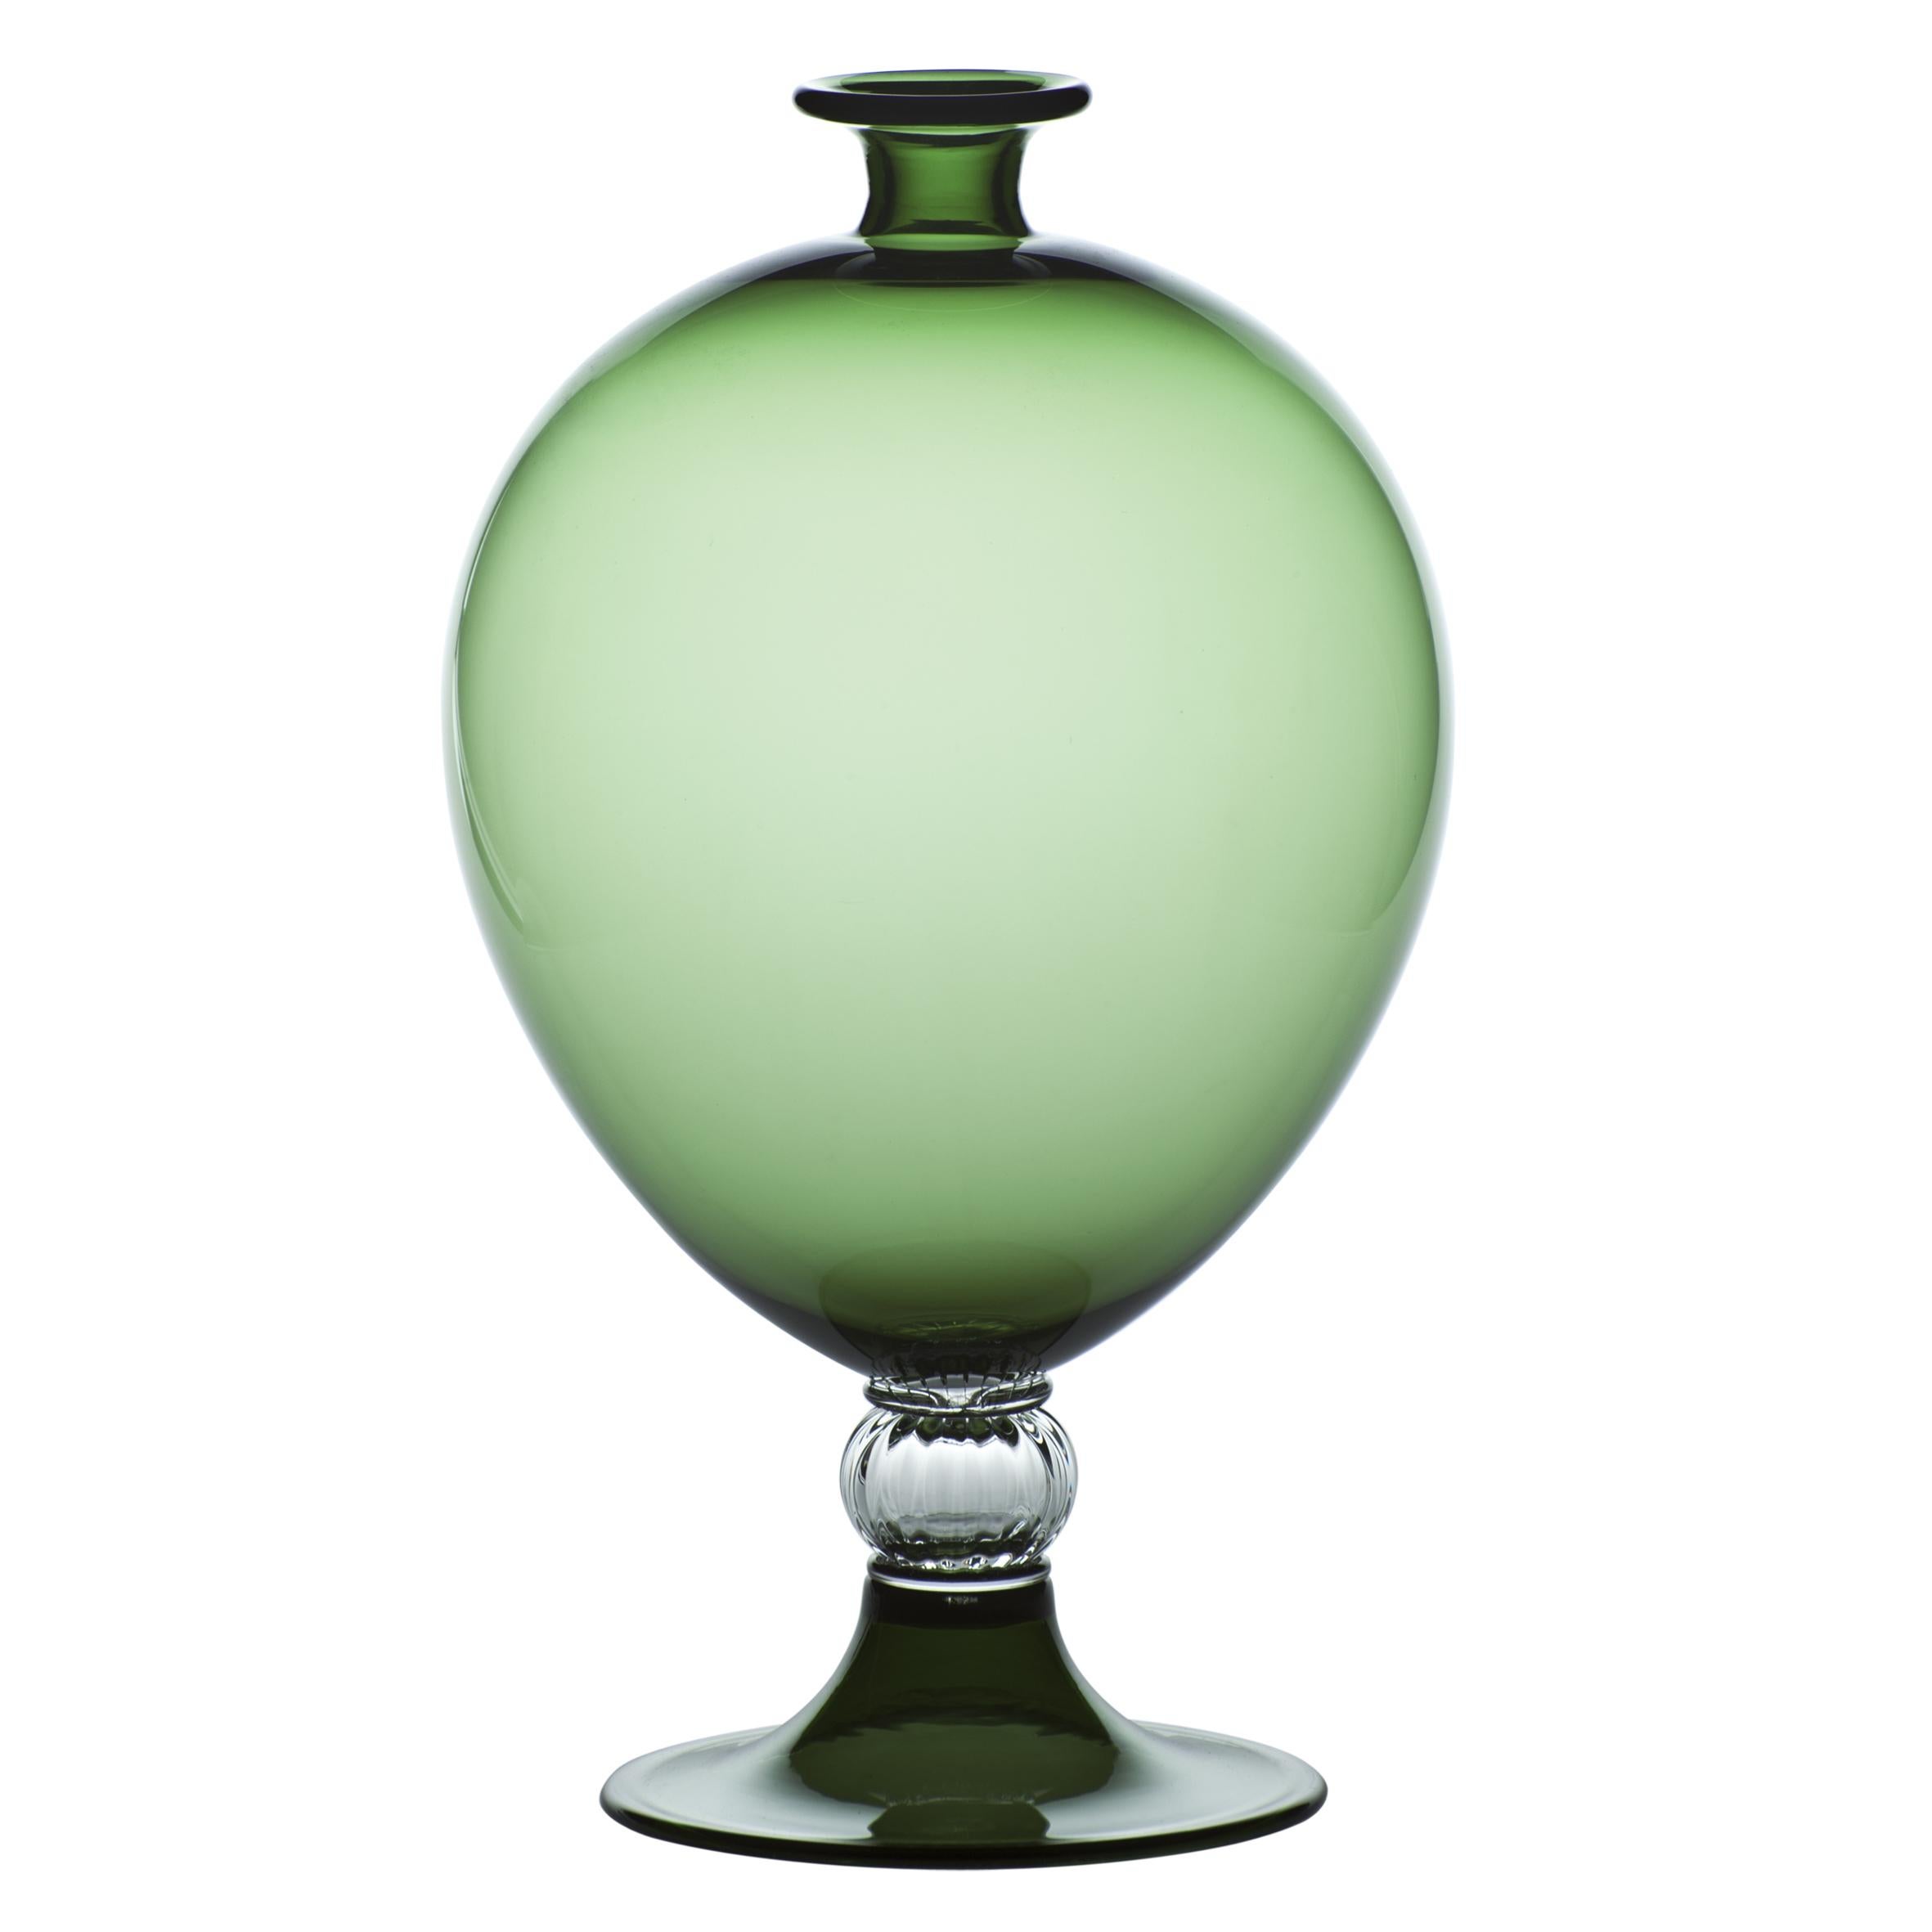 Venini Veronese Glass Vase in Apple Green and Crystal by Vittorio Zecchin